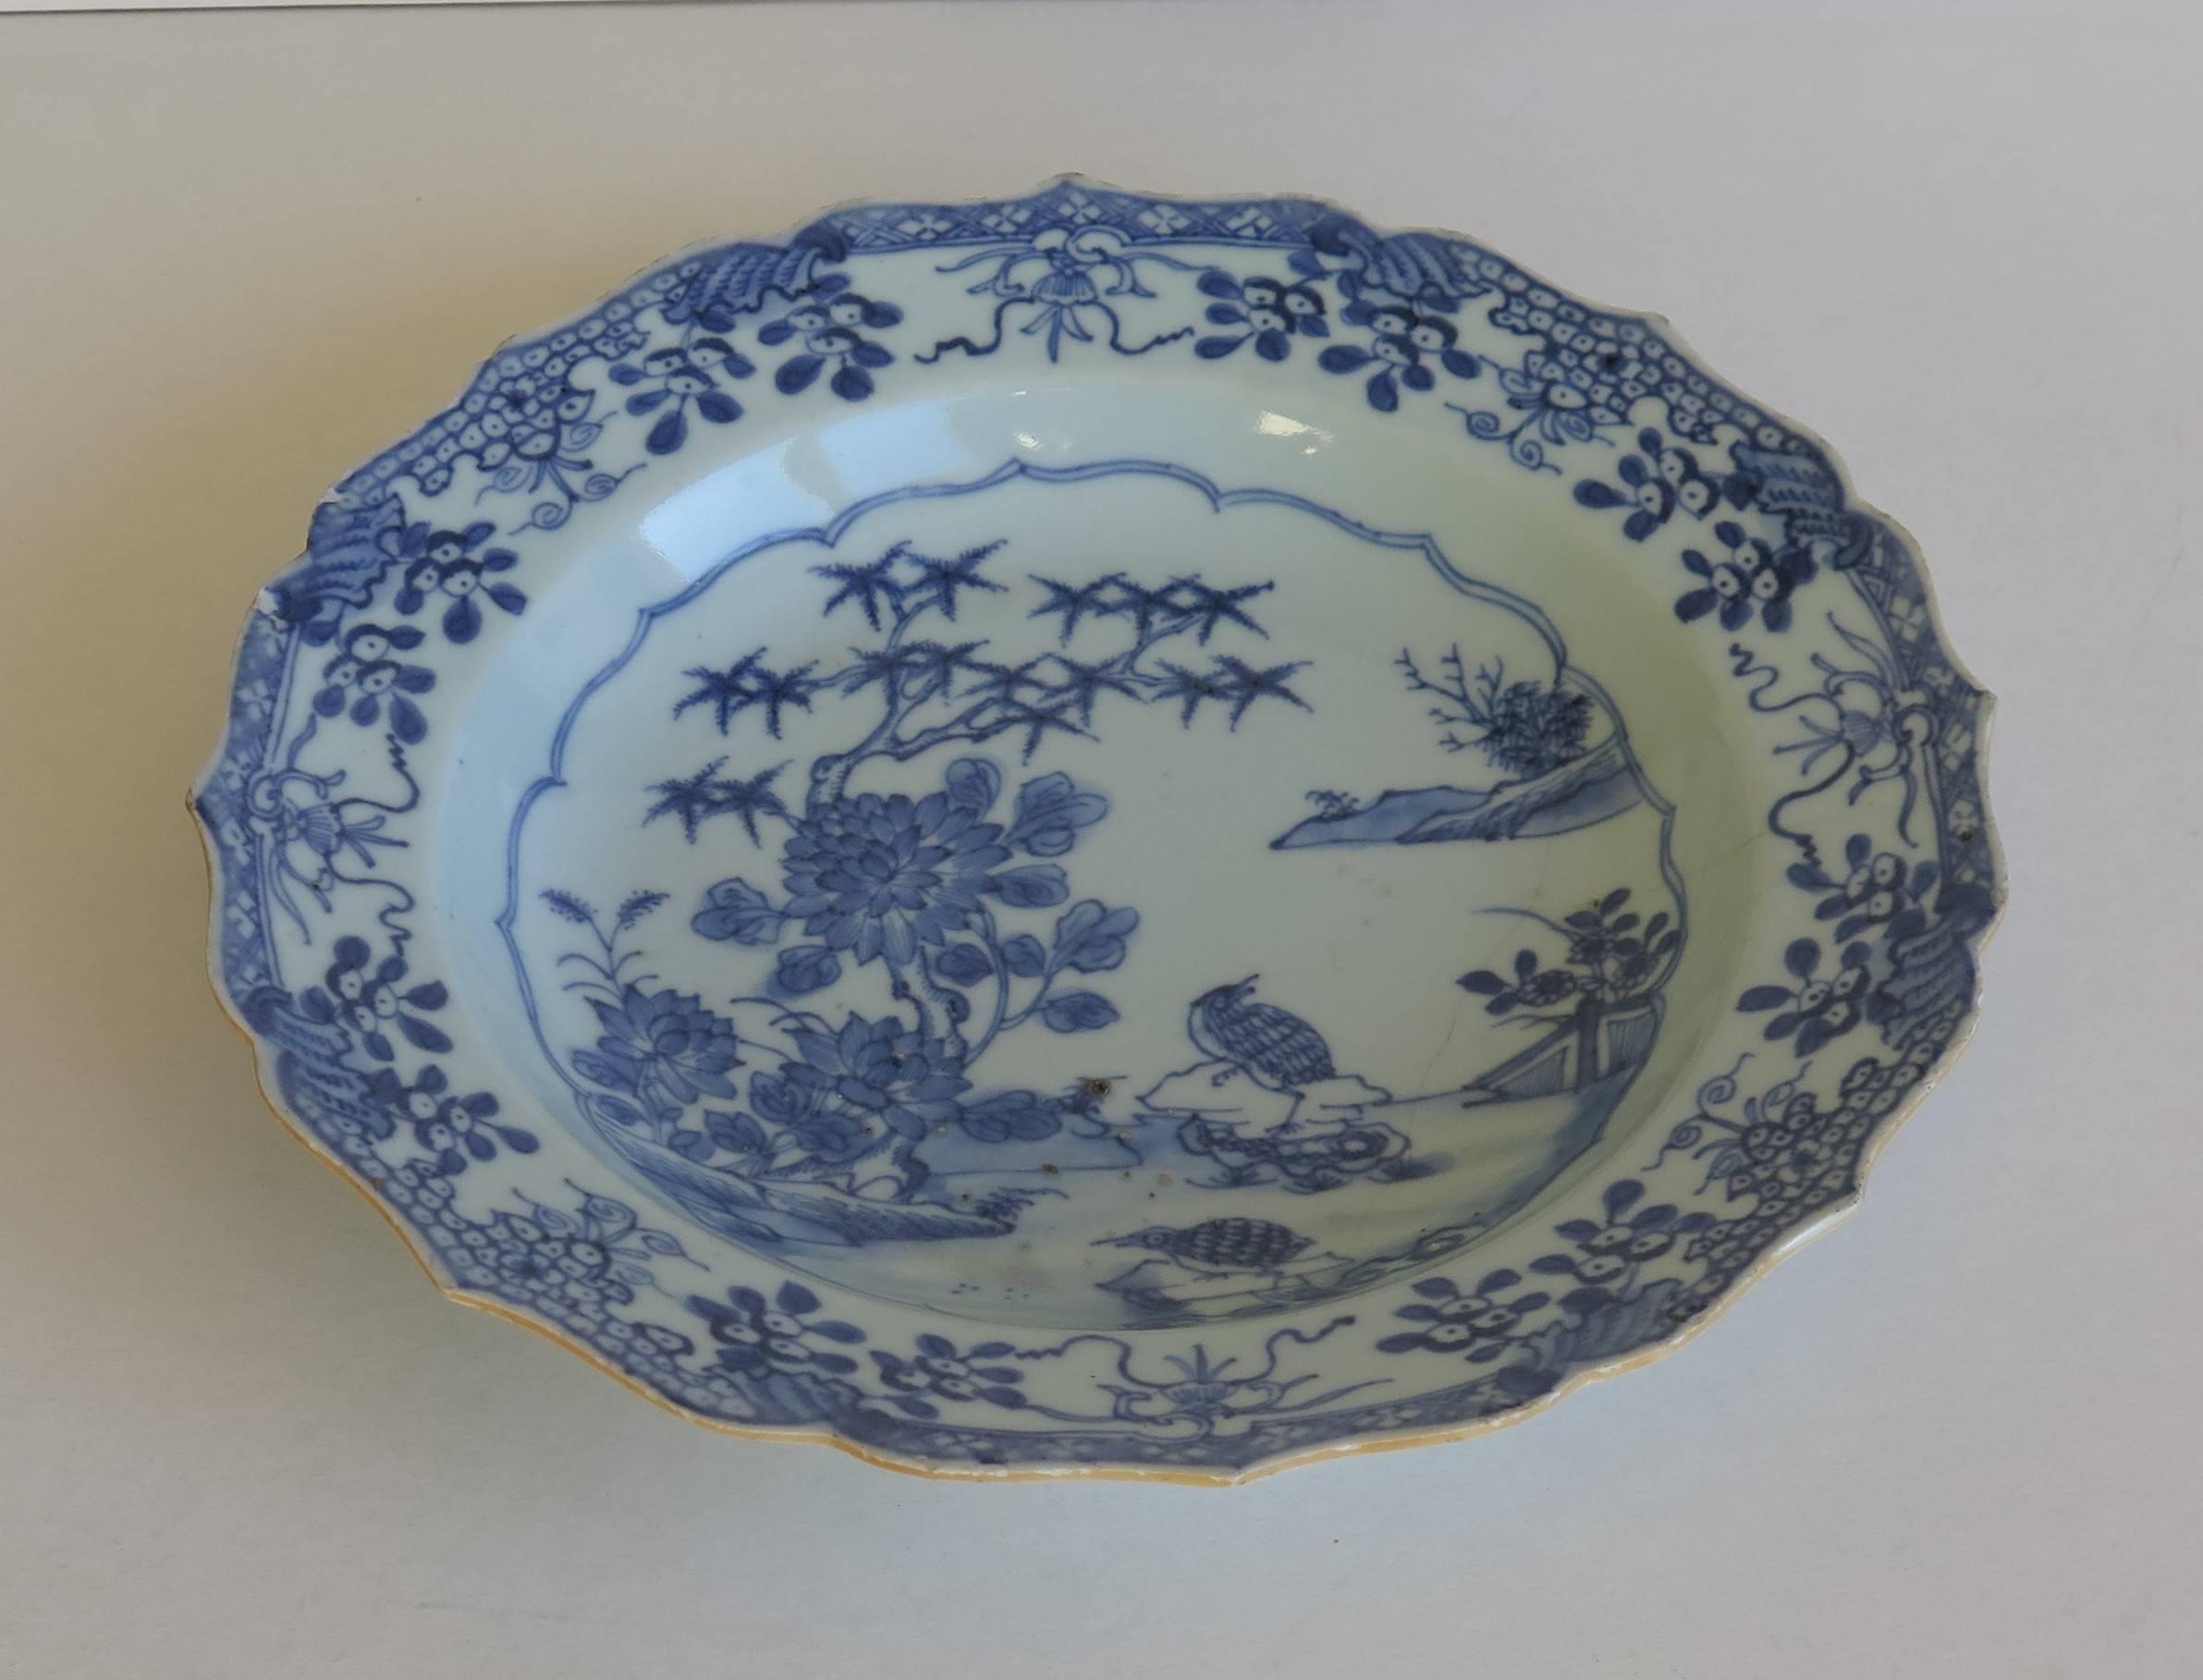 Hand-Painted Chinese Porcelain Plate or Bowl, Blue and White, Woodland Birds, circa 1770